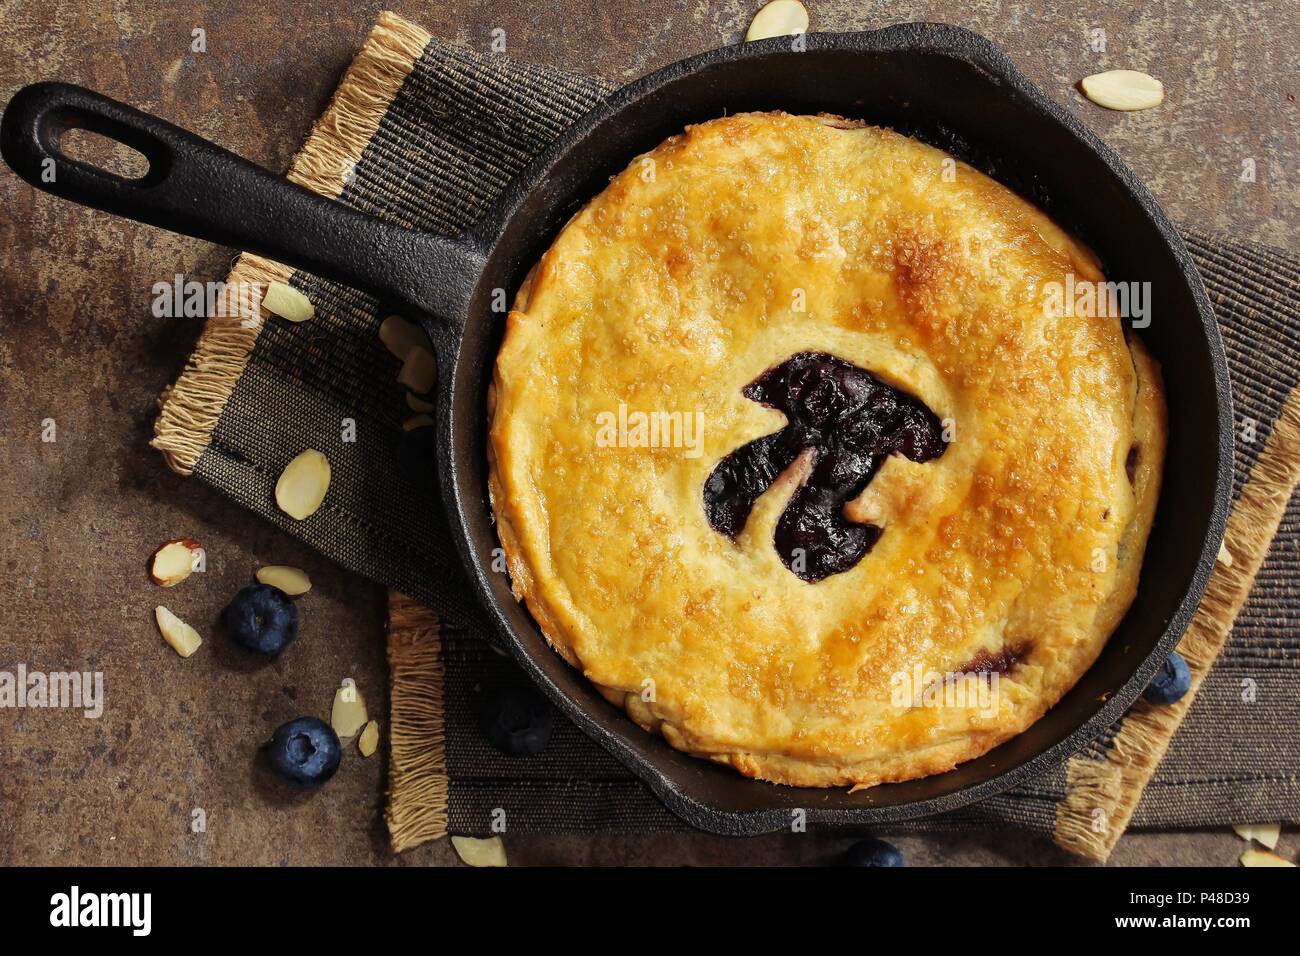 Pi Day special homemade blueberry pie baked in a skillet overhead view Stock Photo